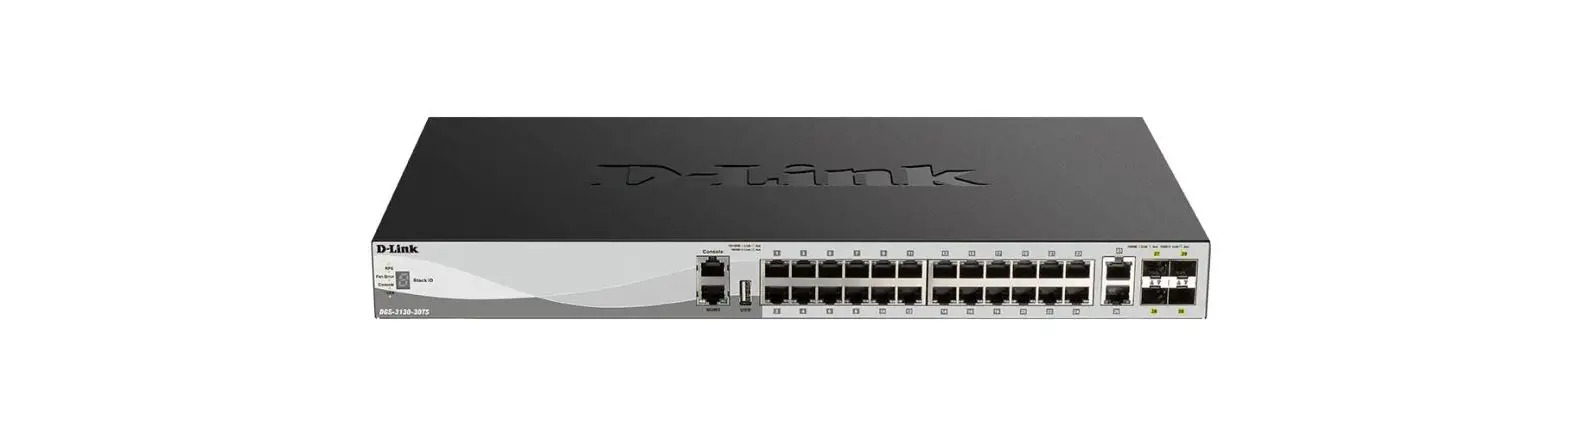 D-Link DGS-3130-30TS Stackable Managed Switch